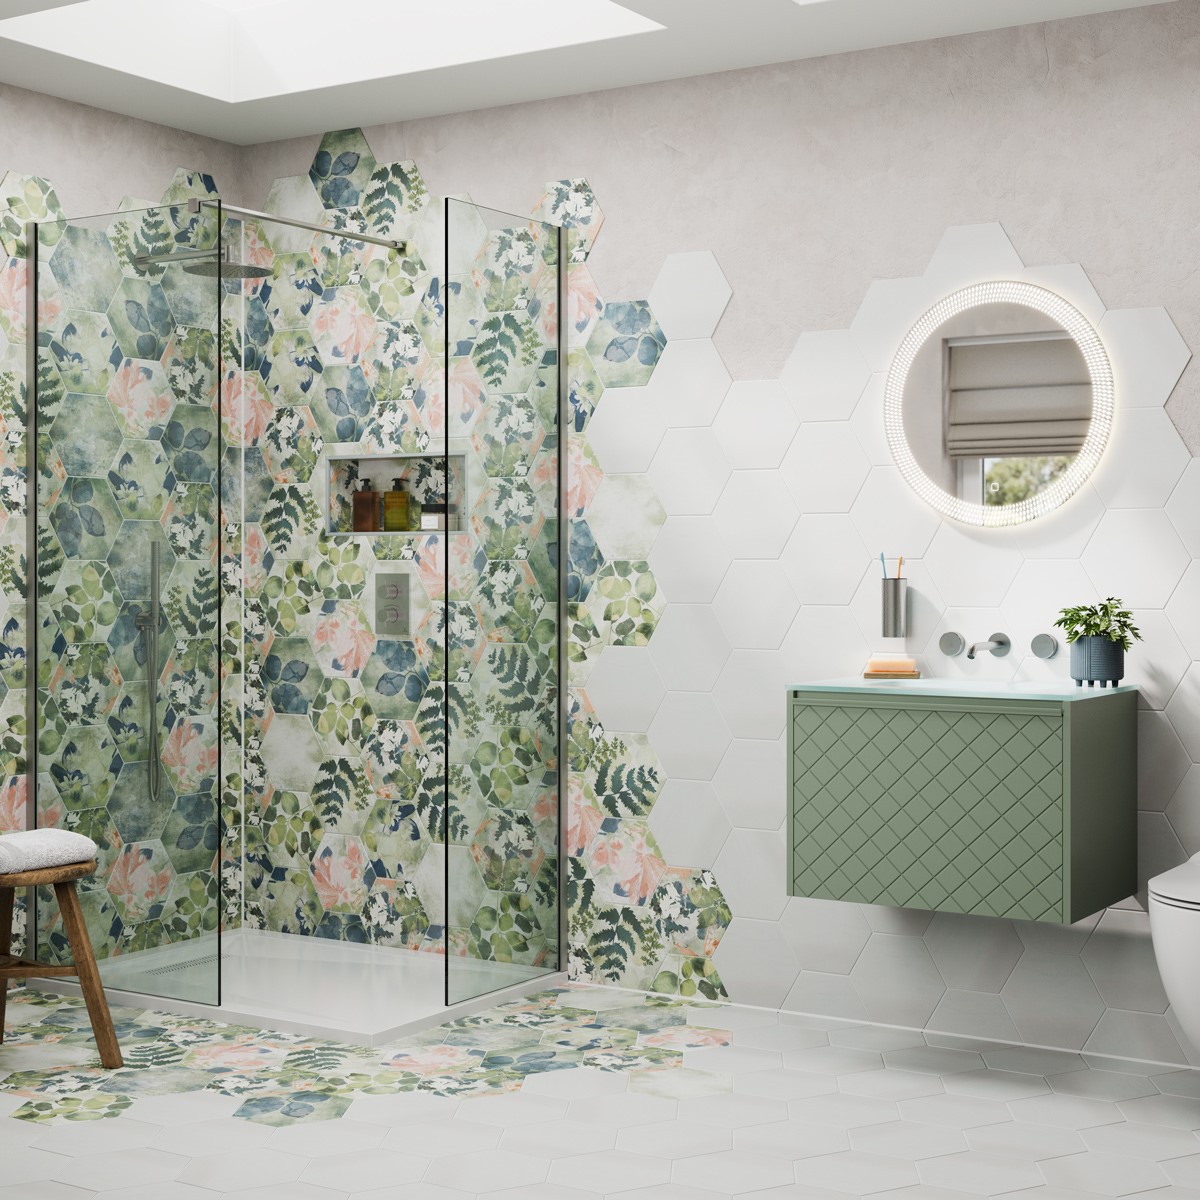 Small bathroom design | View small bathroom solutions for your stylish bathroom idea with our latest arrivals